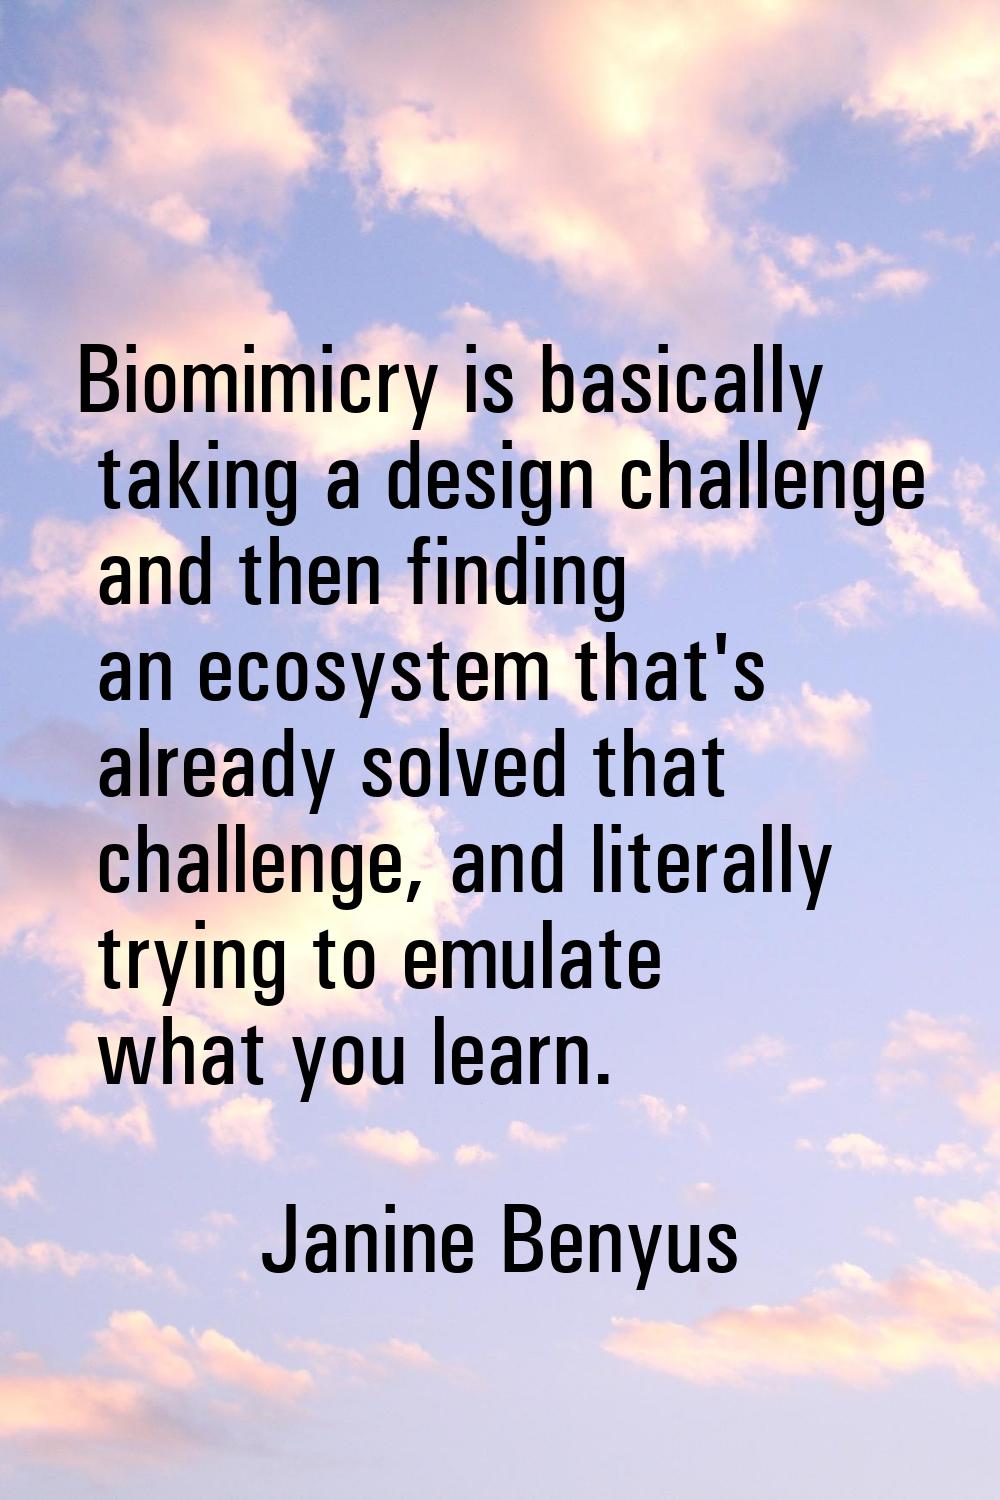 Biomimicry is basically taking a design challenge and then finding an ecosystem that's already solv